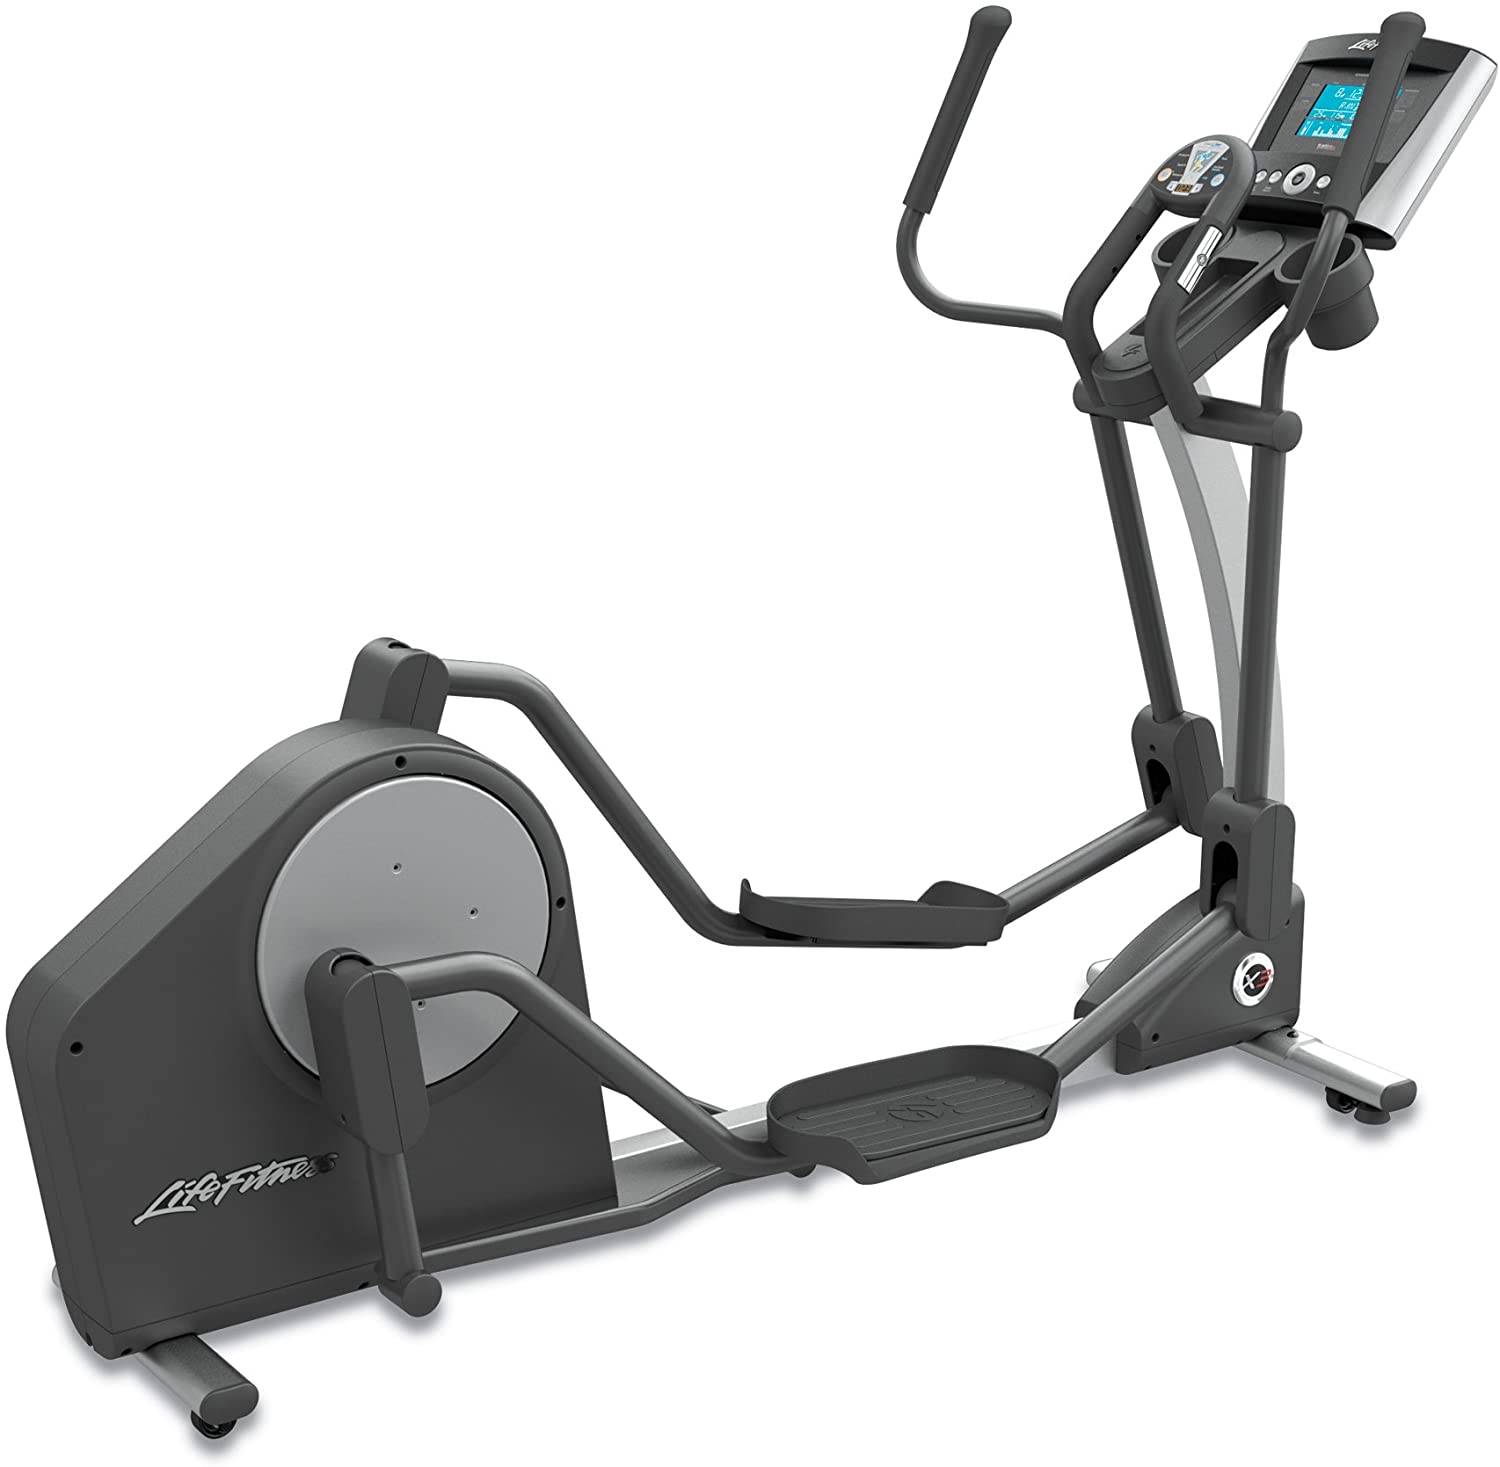 Refurbished Life fitness cross trainer 95xi .Commercial Gym Equipment 